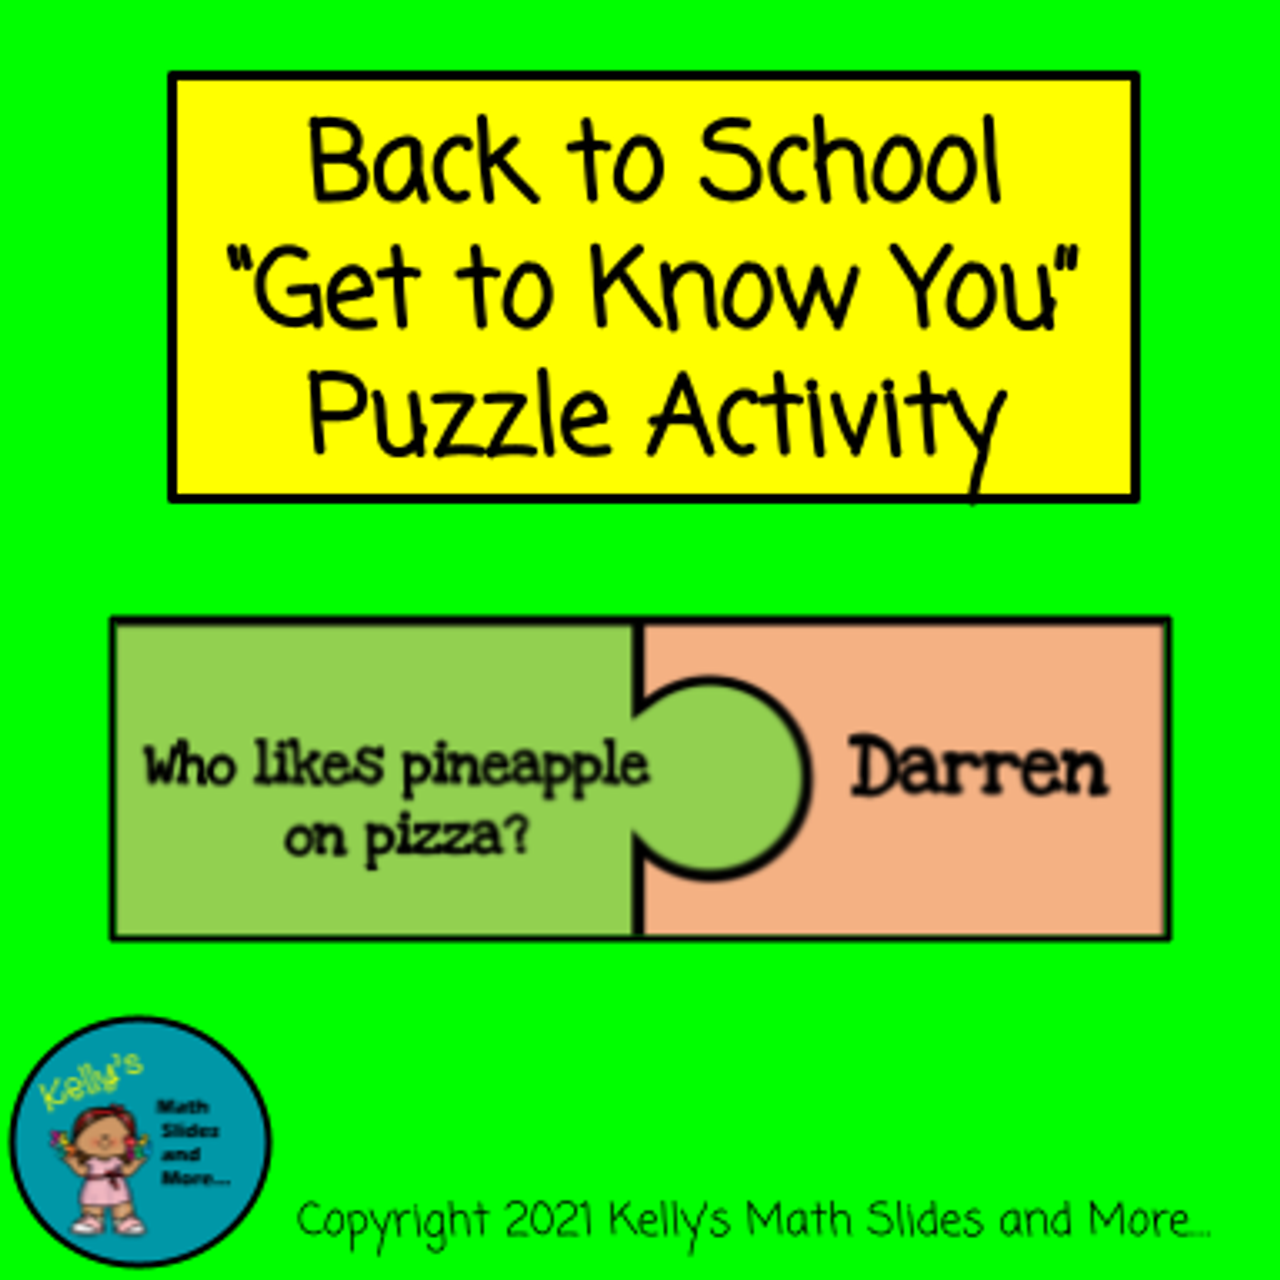 Back to School "Get to Know You" Activity/Puzzle 